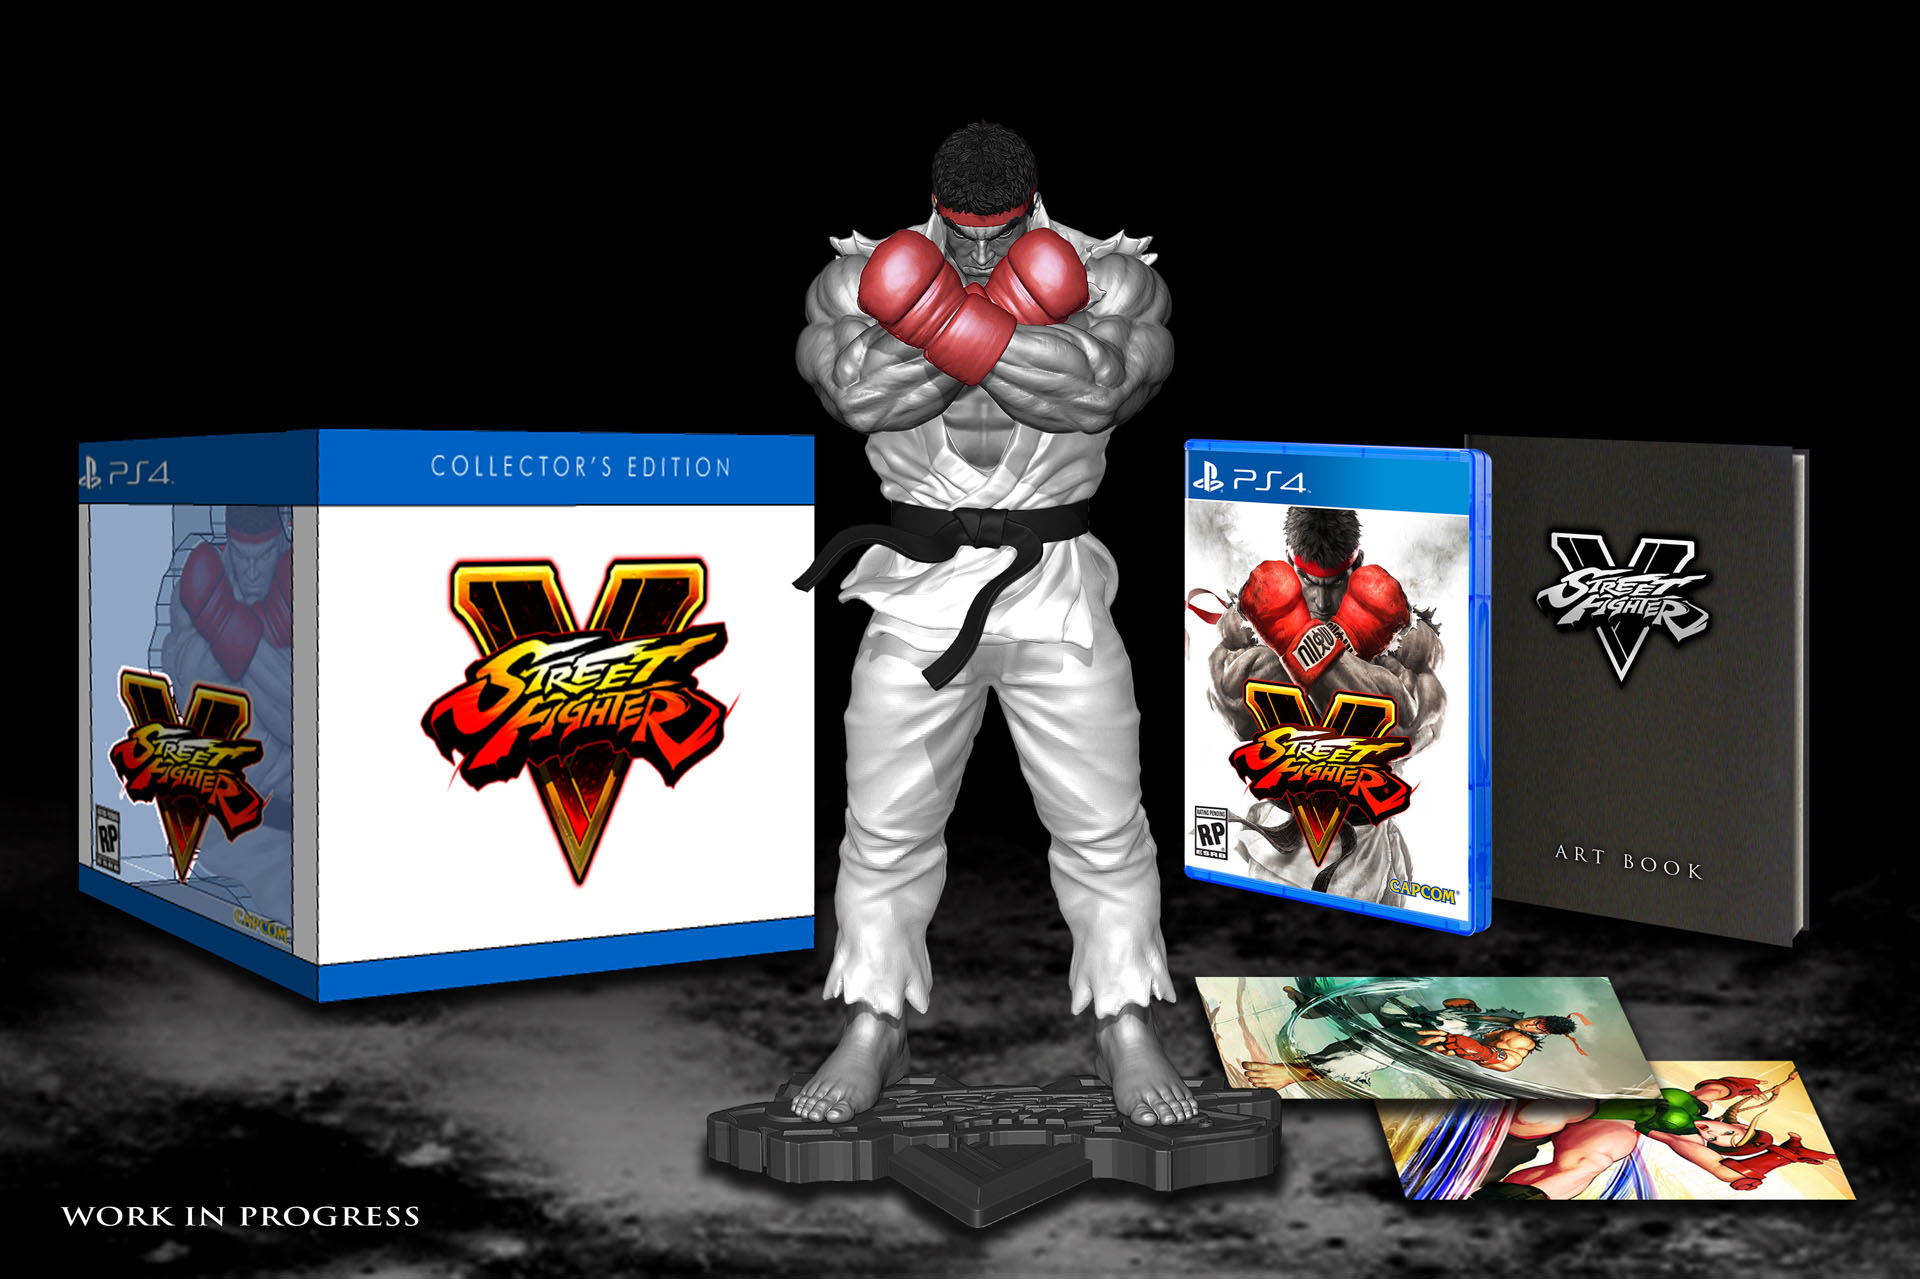 Une édition collector pour Street Fighter V